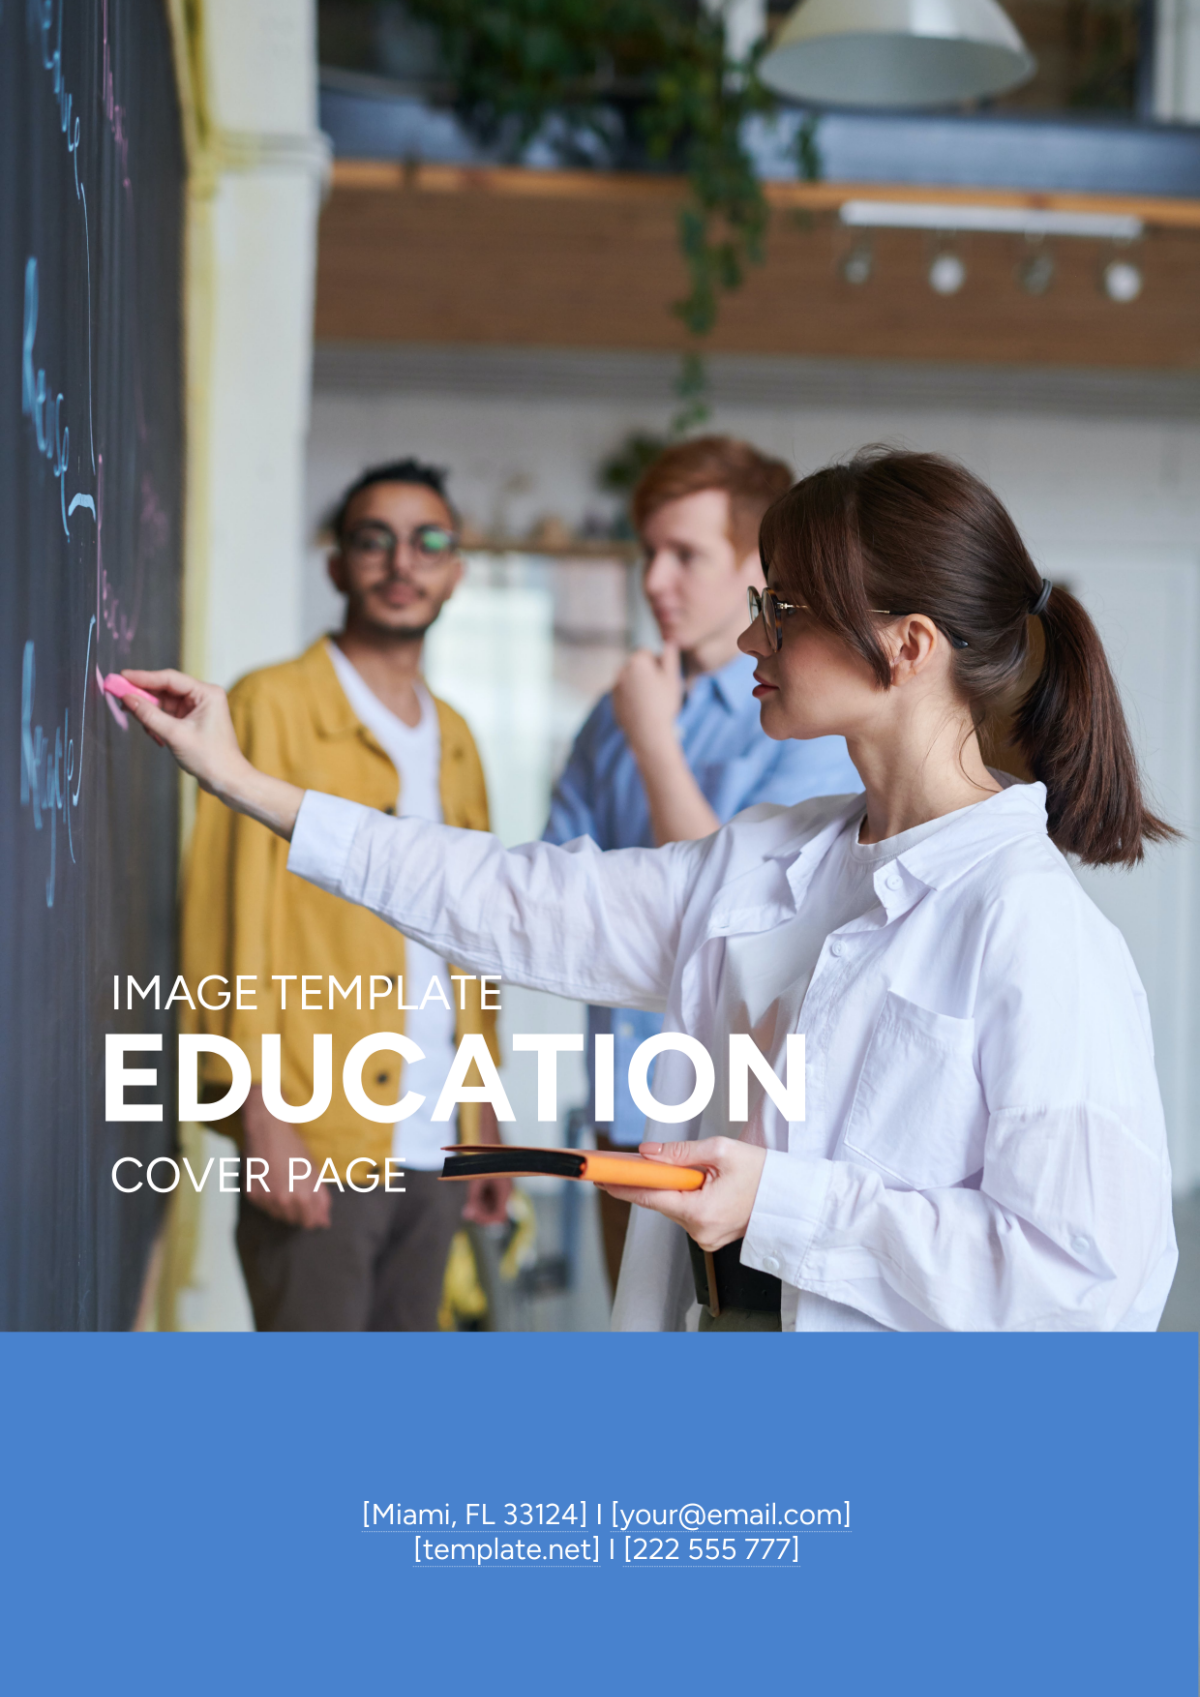 Free Education Cover Page Image Template